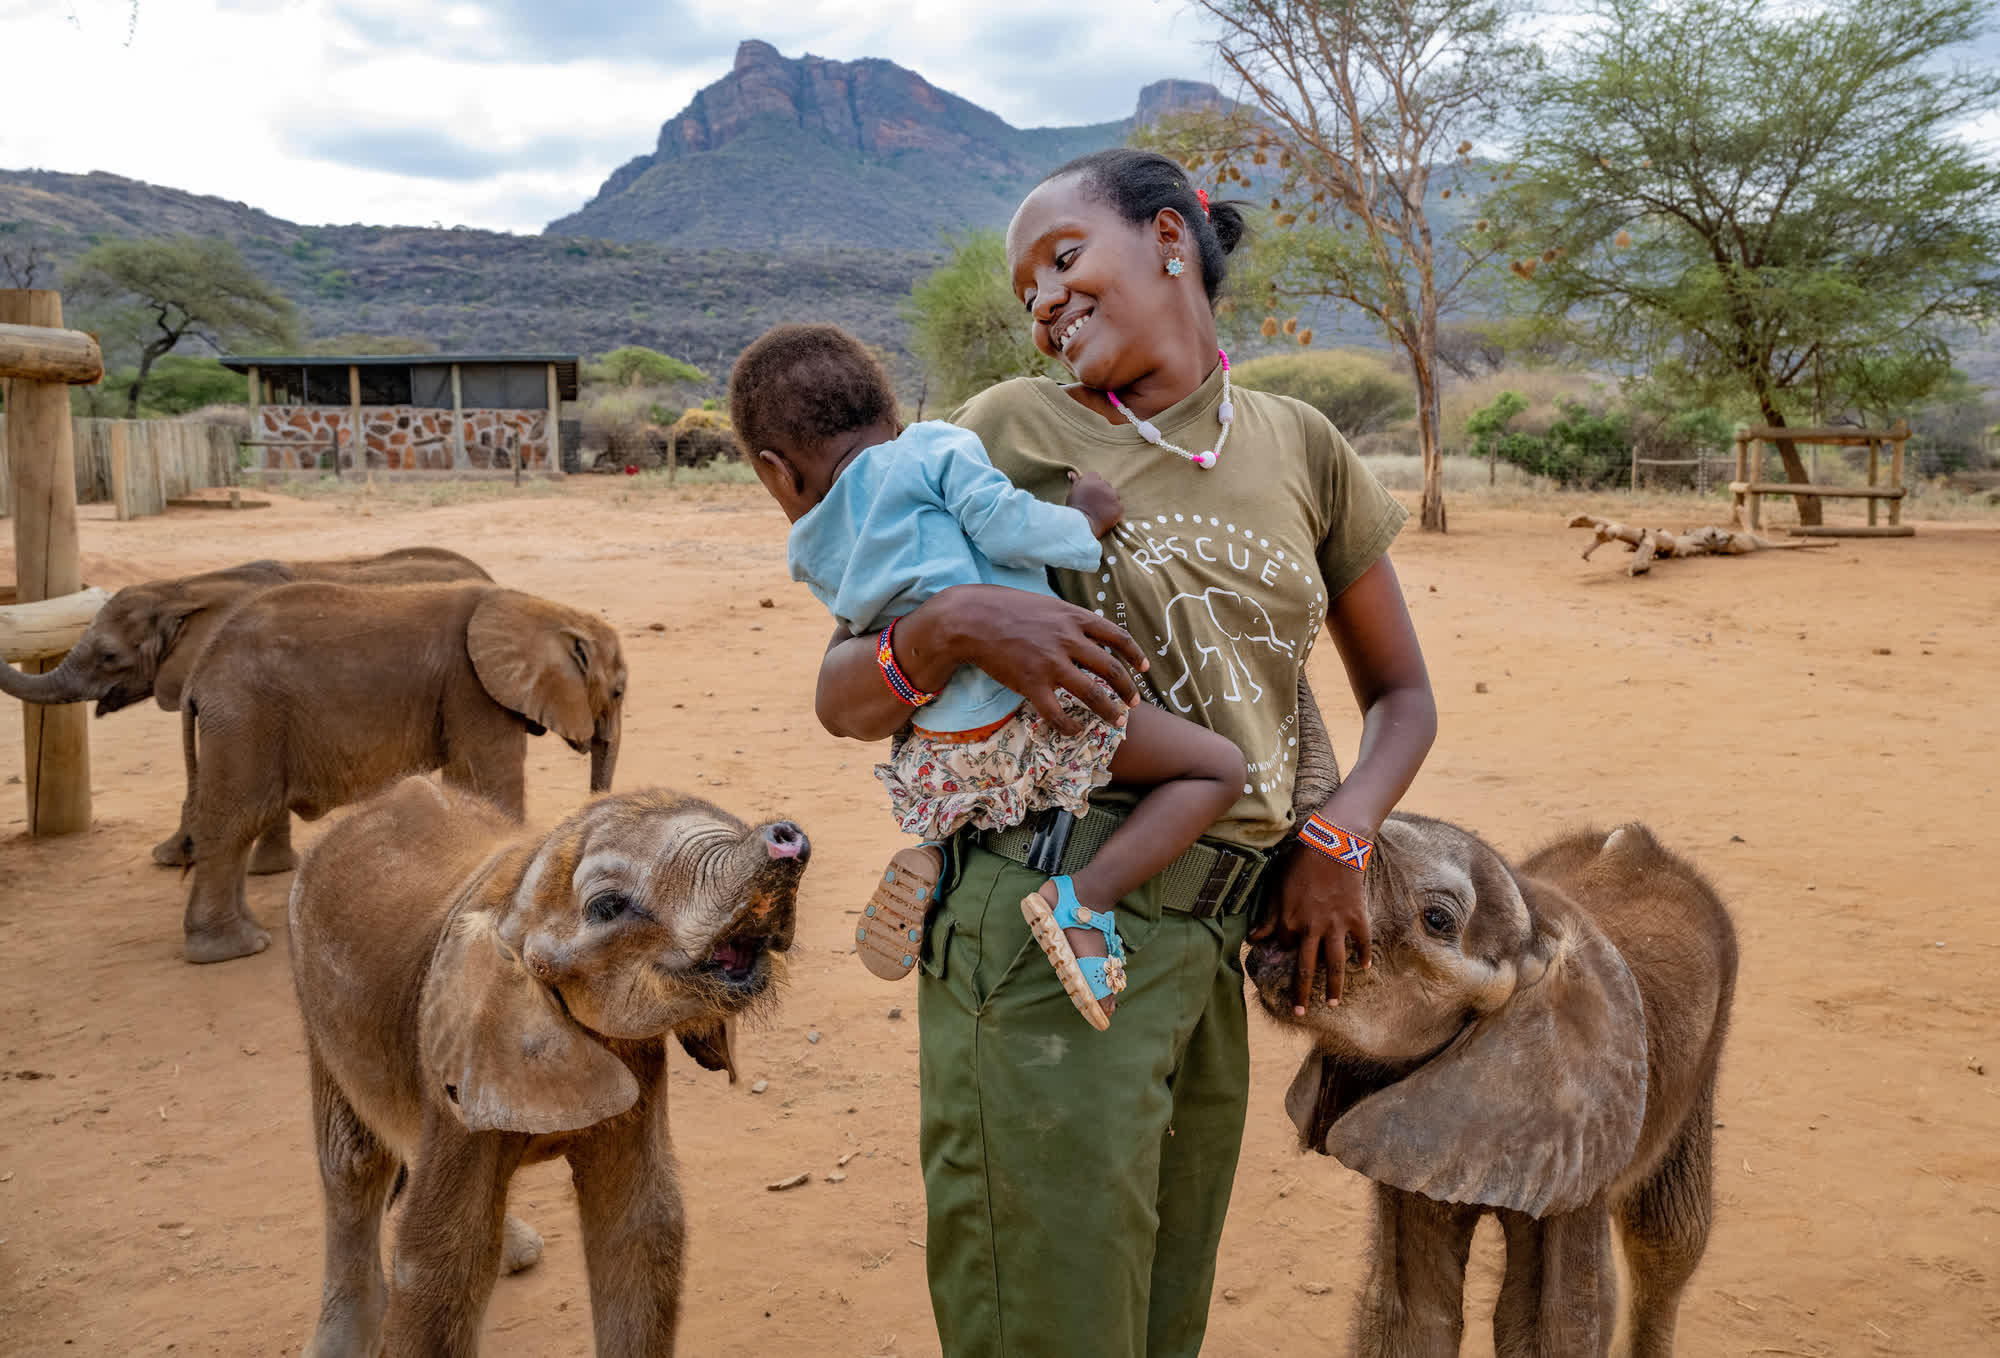 Baby elephants gather around a woman and her child